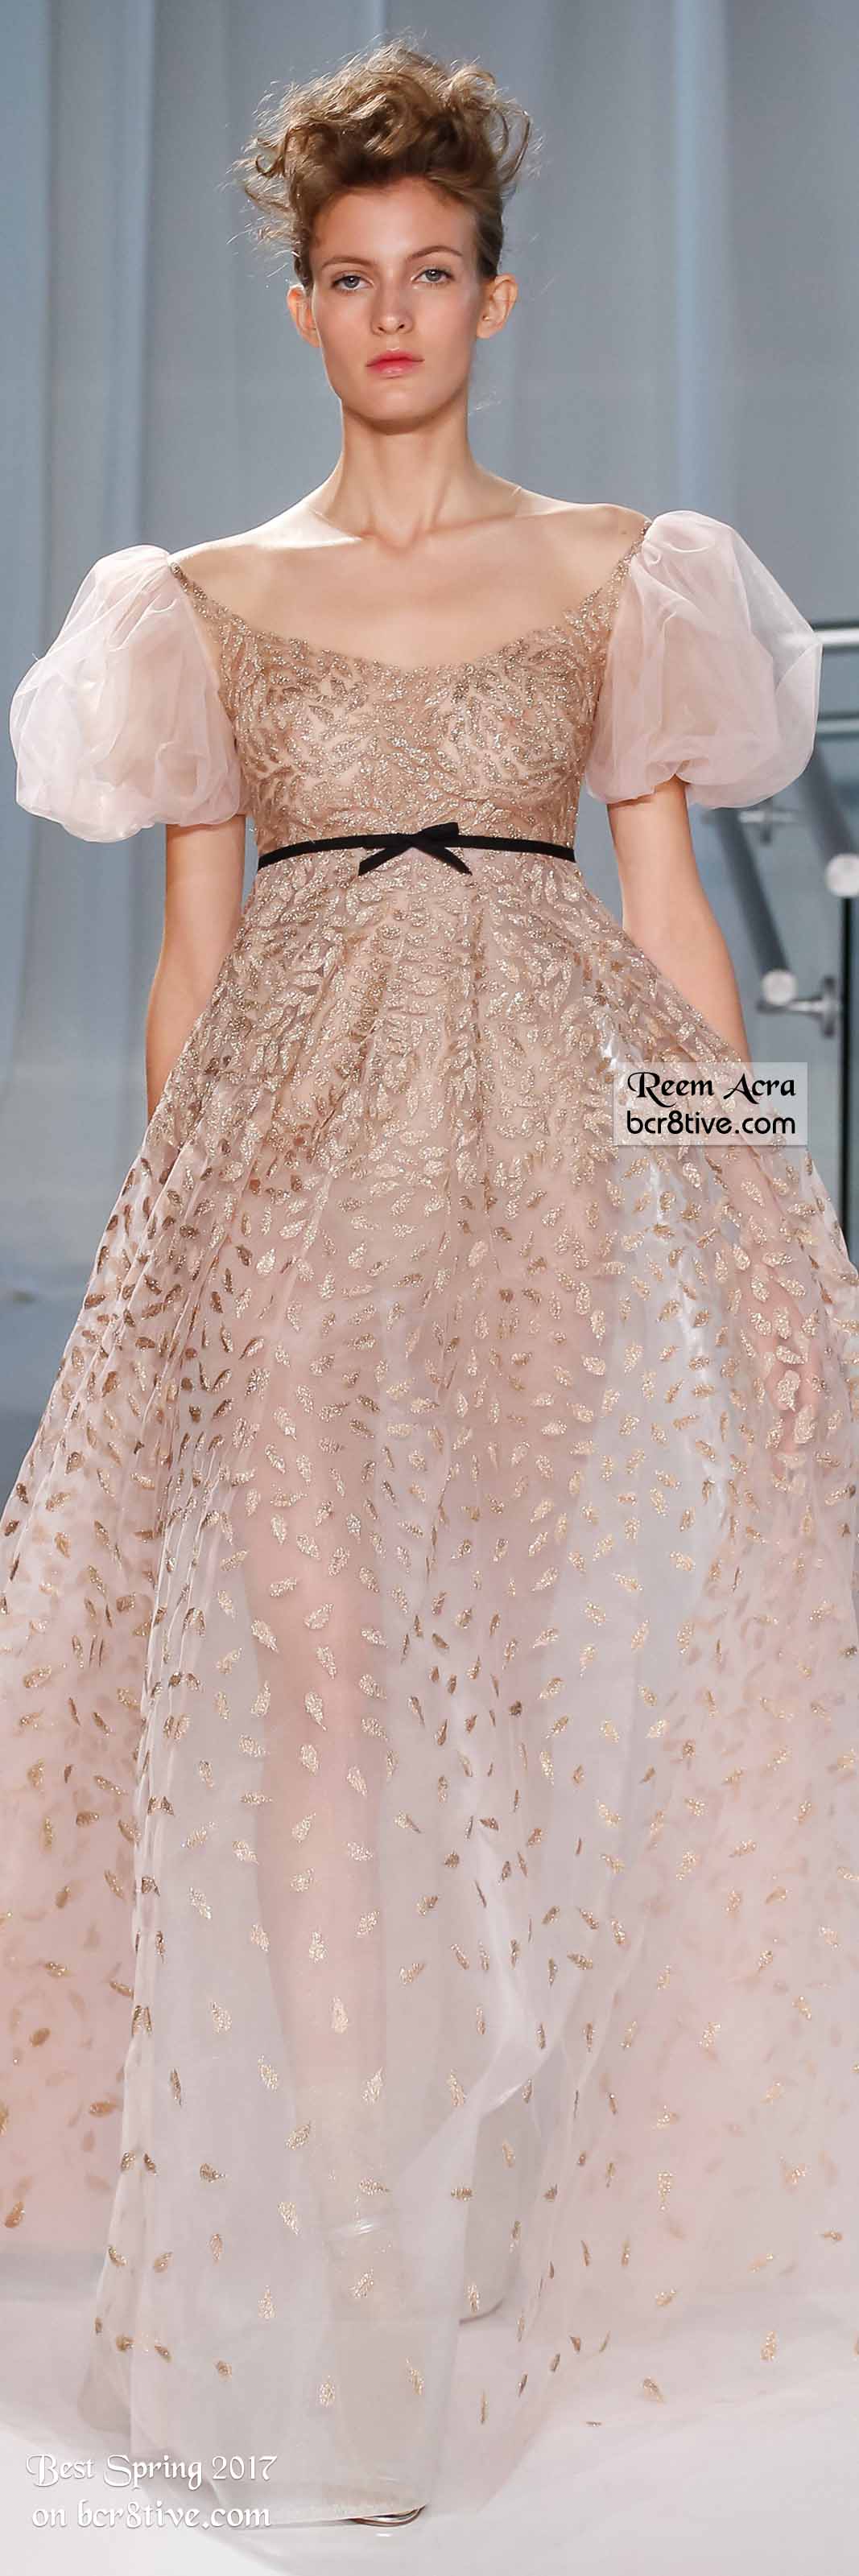 Reem Acra - The Best Looks from New York Fashion Week Spring 2017